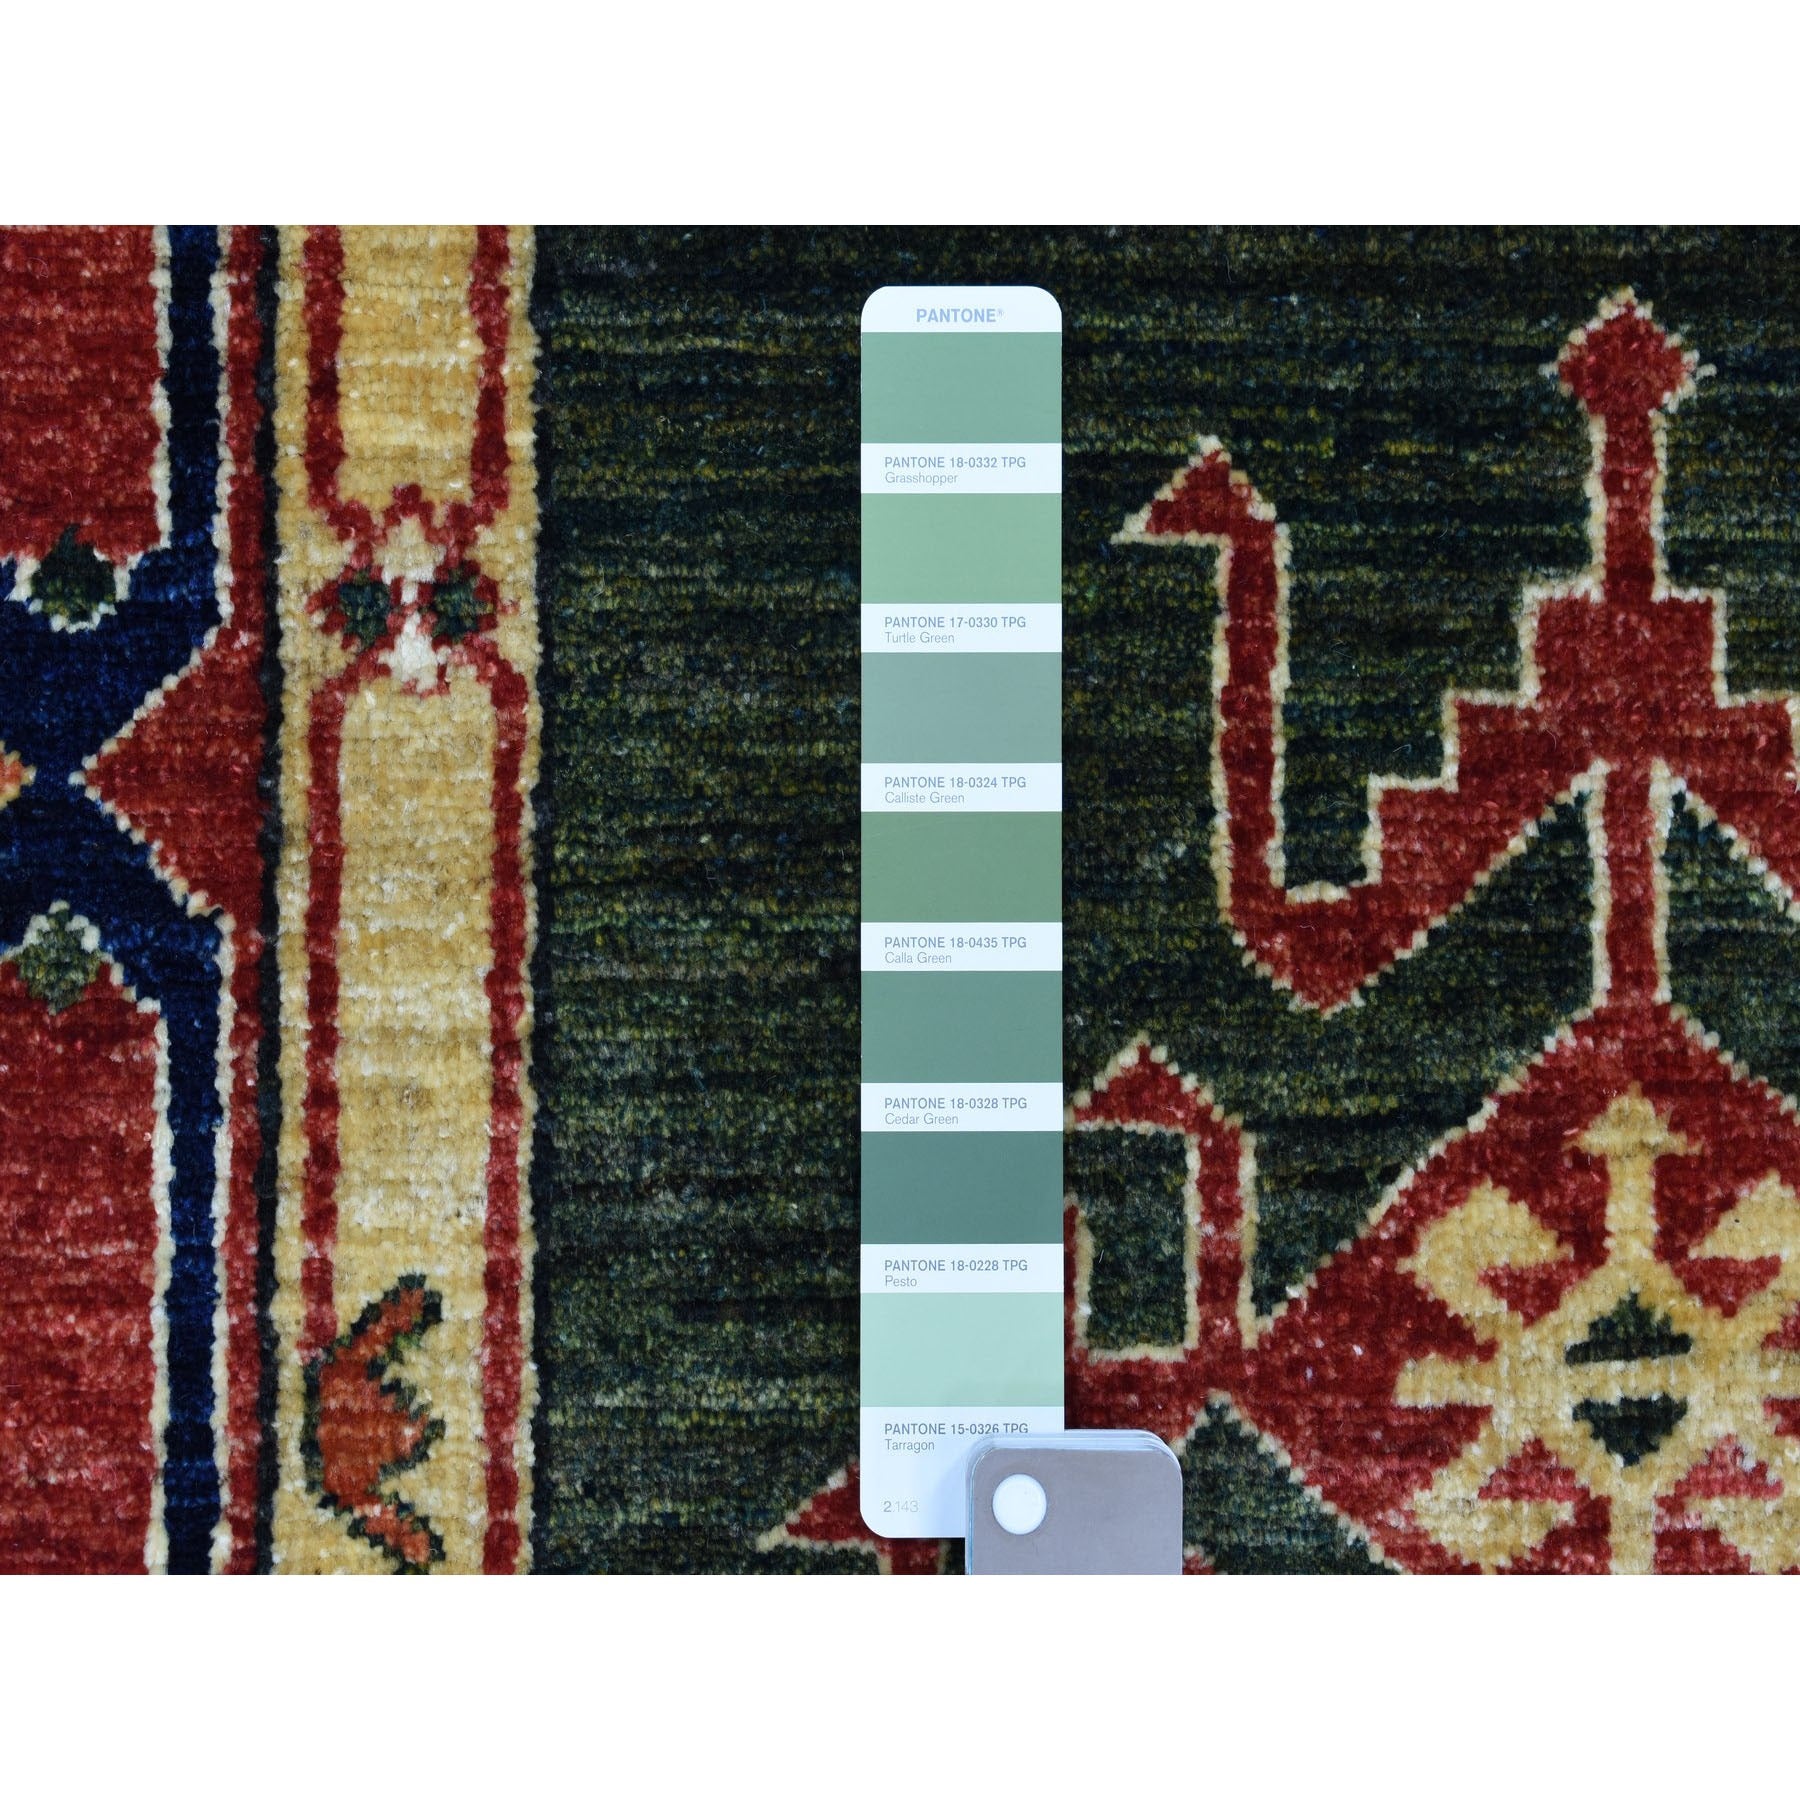 Hand Knotted Tribal Runner > Design# CCSR56785 > Size: 4'-0" x 9'-8"